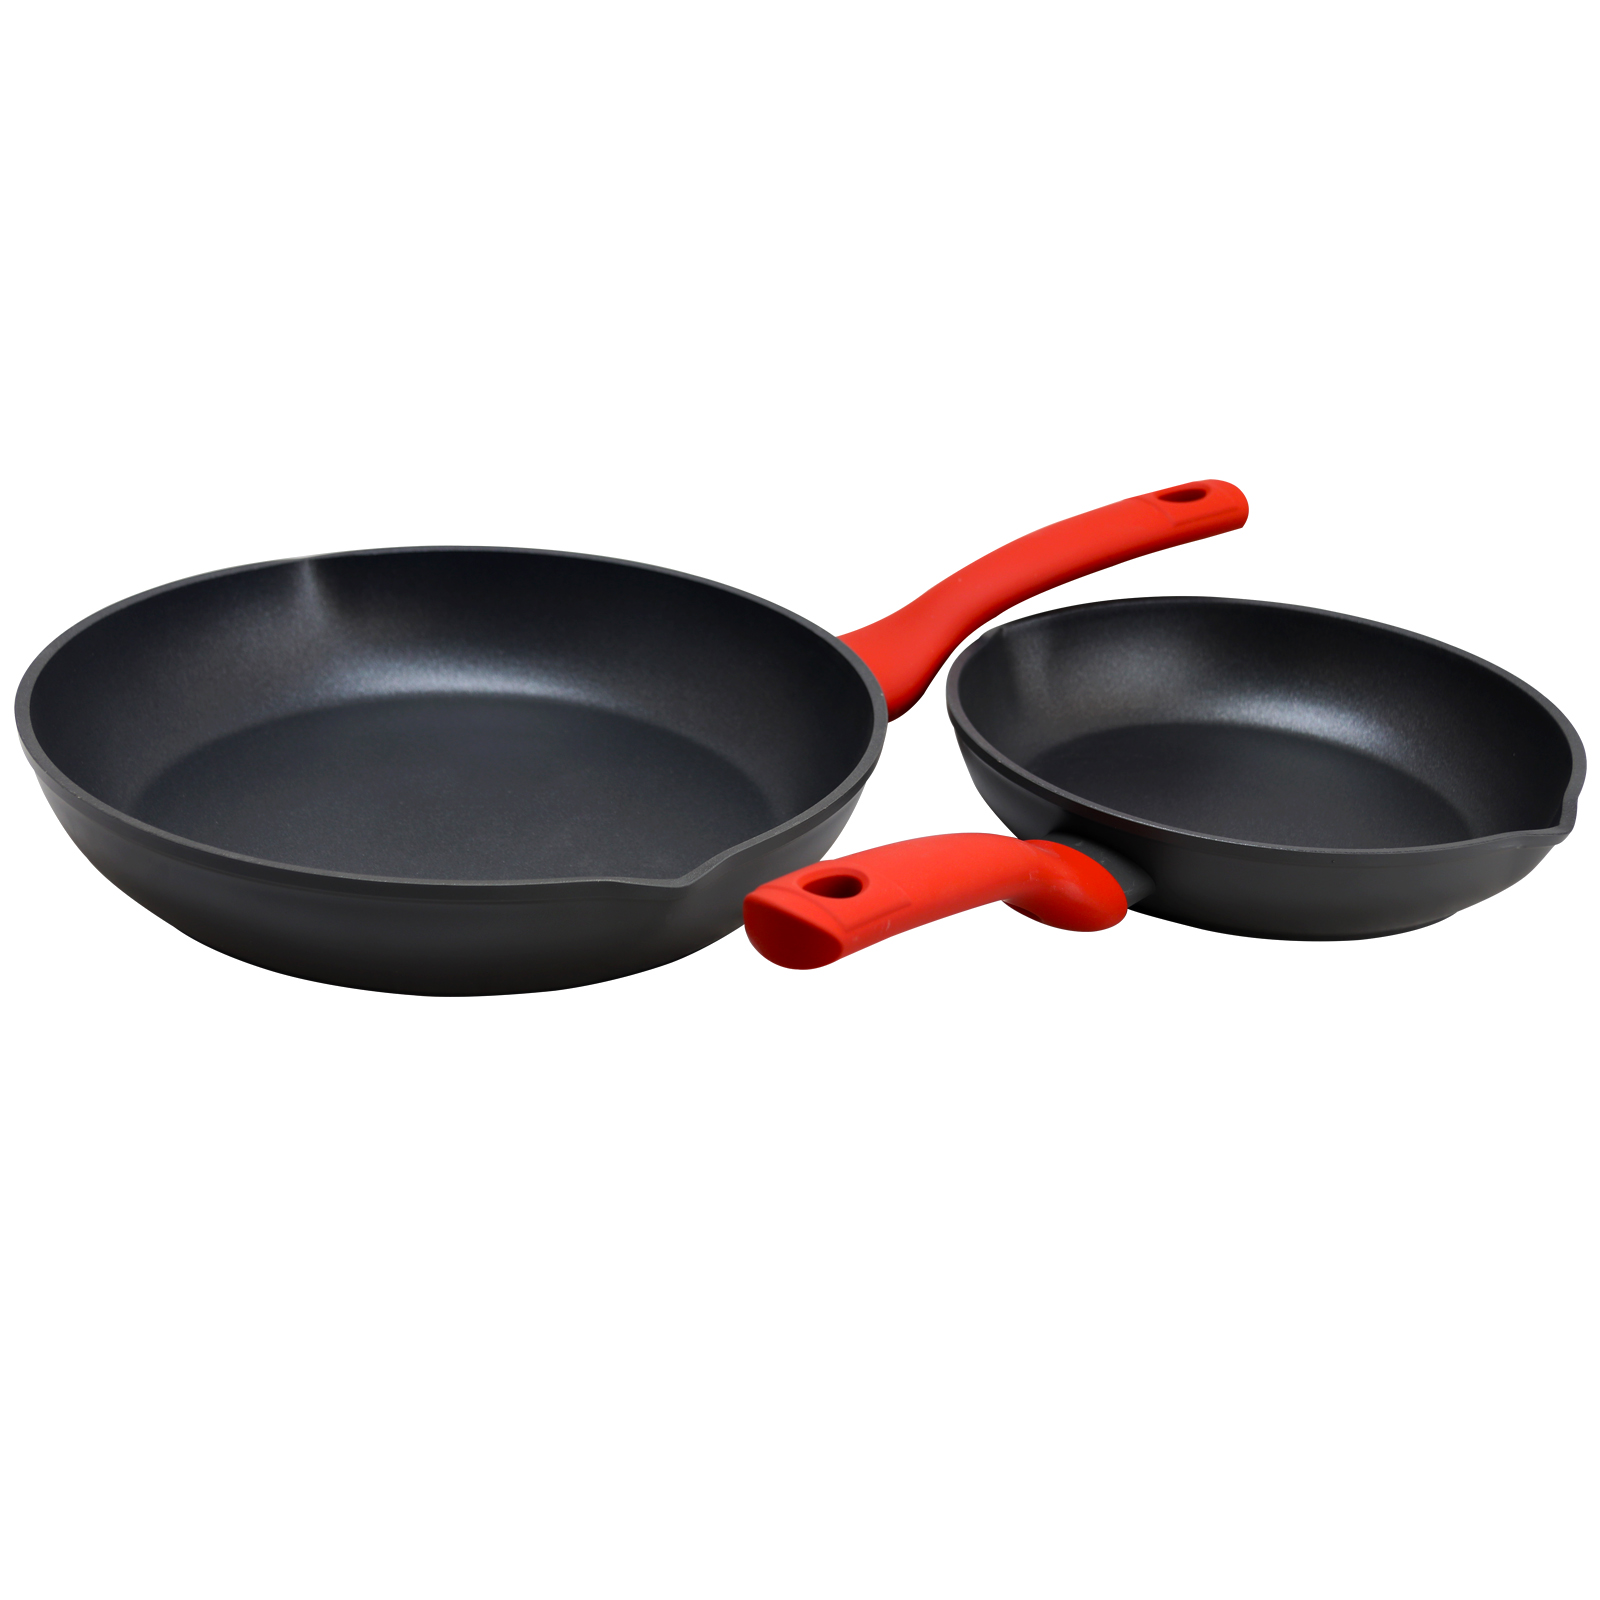 Weight Watchers Livingson 2 Piece Frying Pan Set in Charcoal with Red Handles